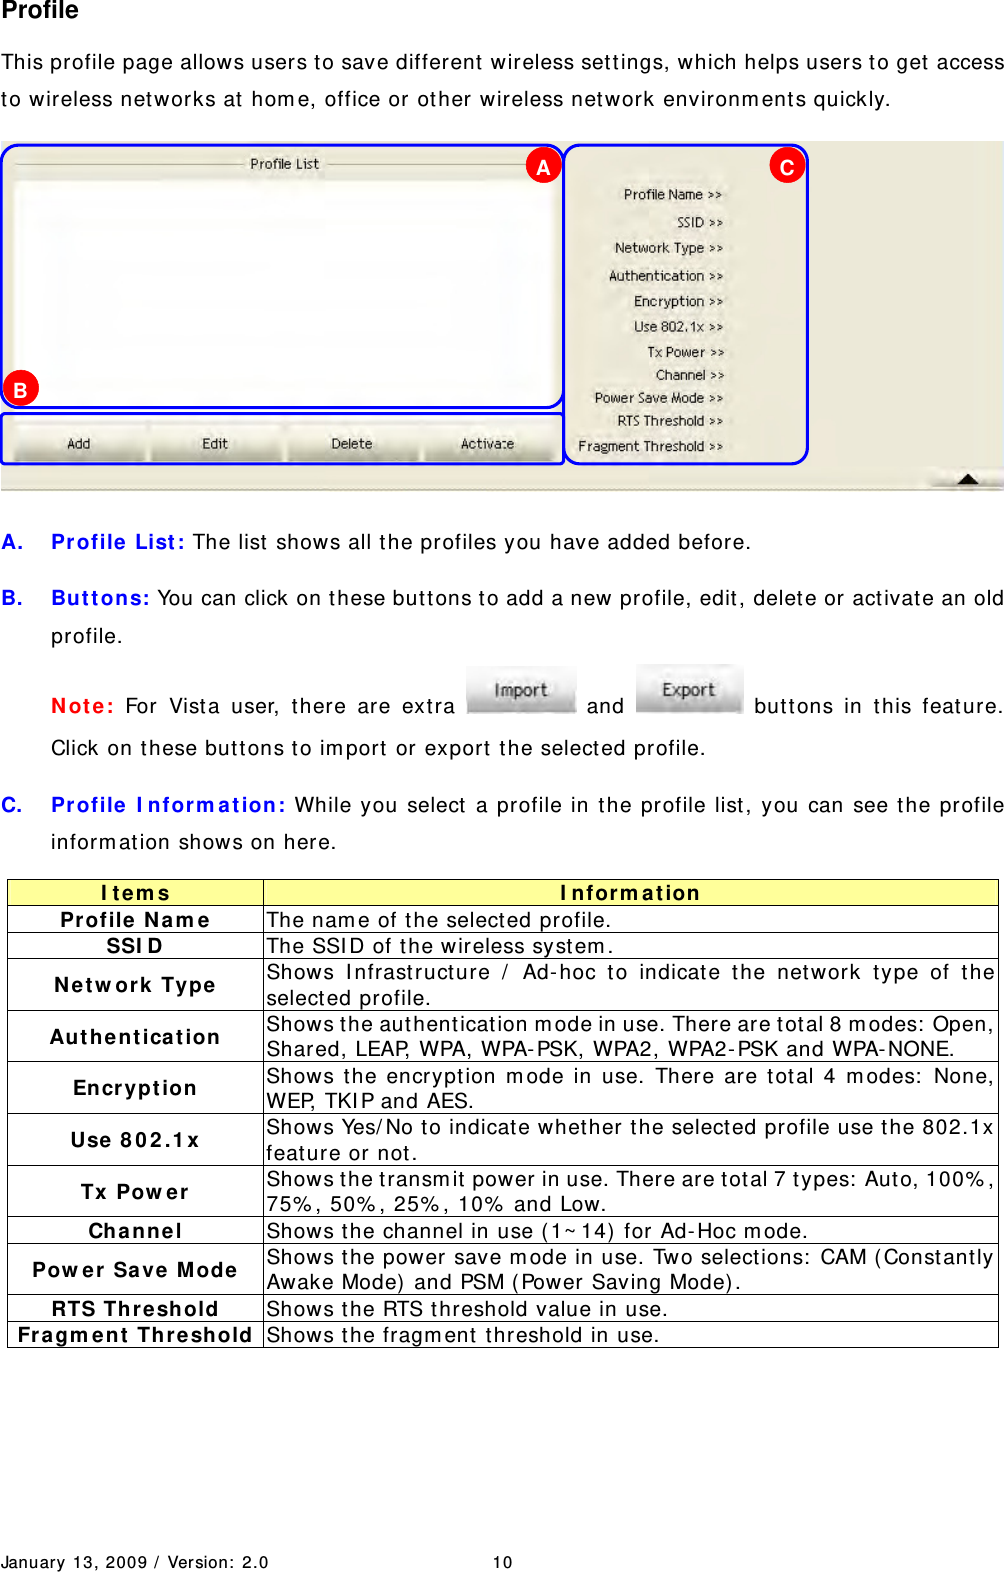 January 13, 2009 /  Ver sion:  2.0 10 Profile This profile page allows users to save different  wireless set tings, which helps users to get  access to wireless net works at hom e, office or ot her wireless net work environm ent s quickly.    A. Pr ofile List : The list  shows all the profiles you have added before. B.  But t ons: You can click on these but tons to add a new profile, edit , delet e or activat e an old profile.  N ot e : For Vist a user, t here are ext ra   and   but tons in this feat ure. Click on t hese butt ons to im port  or export t he select ed profile.   C. Profile I nform at ion: While you select a profile in the profile list, you can see t he profile inform at ion shows on here. I tem s  I nfor m a t ion  Profile  N am e  The nam e of t he selected profile. SSI D  The SSI D of t he wireless syst em . N e tw ork  Type  Shows I nfrast ruct ure /  Ad- hoc t o indicate the network type of t he selected profile. Au t he n t ica tion  Shows t he aut henticat ion m ode in use. There are tot al 8 m odes:  Open, Shared, LEAP, WPA, WPA-PSK, WPA2, WPA2- PSK and WPA- NONE. En cryp t ion  Shows t he encryption m ode in use. There are tot al 4 m odes:  None, WEP, TKI P and AES. Use  8 0 2 .1 x   Shows Yes/ No t o indicate whet her the select ed profile use t he 802.1x feat ure or not . Tx Pow er  Shows t he t ransm it power in use. There are tot al 7 types:  Aut o, 100% , 75% , 50% , 25% , 10%  and Low. Channel  Shows t he channel in use ( 1~ 14)  for Ad- Hoc m ode. Pow er Save M ode  Shows t he power save m ode in use. Two select ions:  CAM ( Constant ly Awake Mode)  and PSM ( Pow er Saving Mode) .   RTS Threshold  Shows t he RTS t hreshold value in use.   Fragm e n t  Threshold Shows t he fragm ent  t hreshold in use.  A B C 